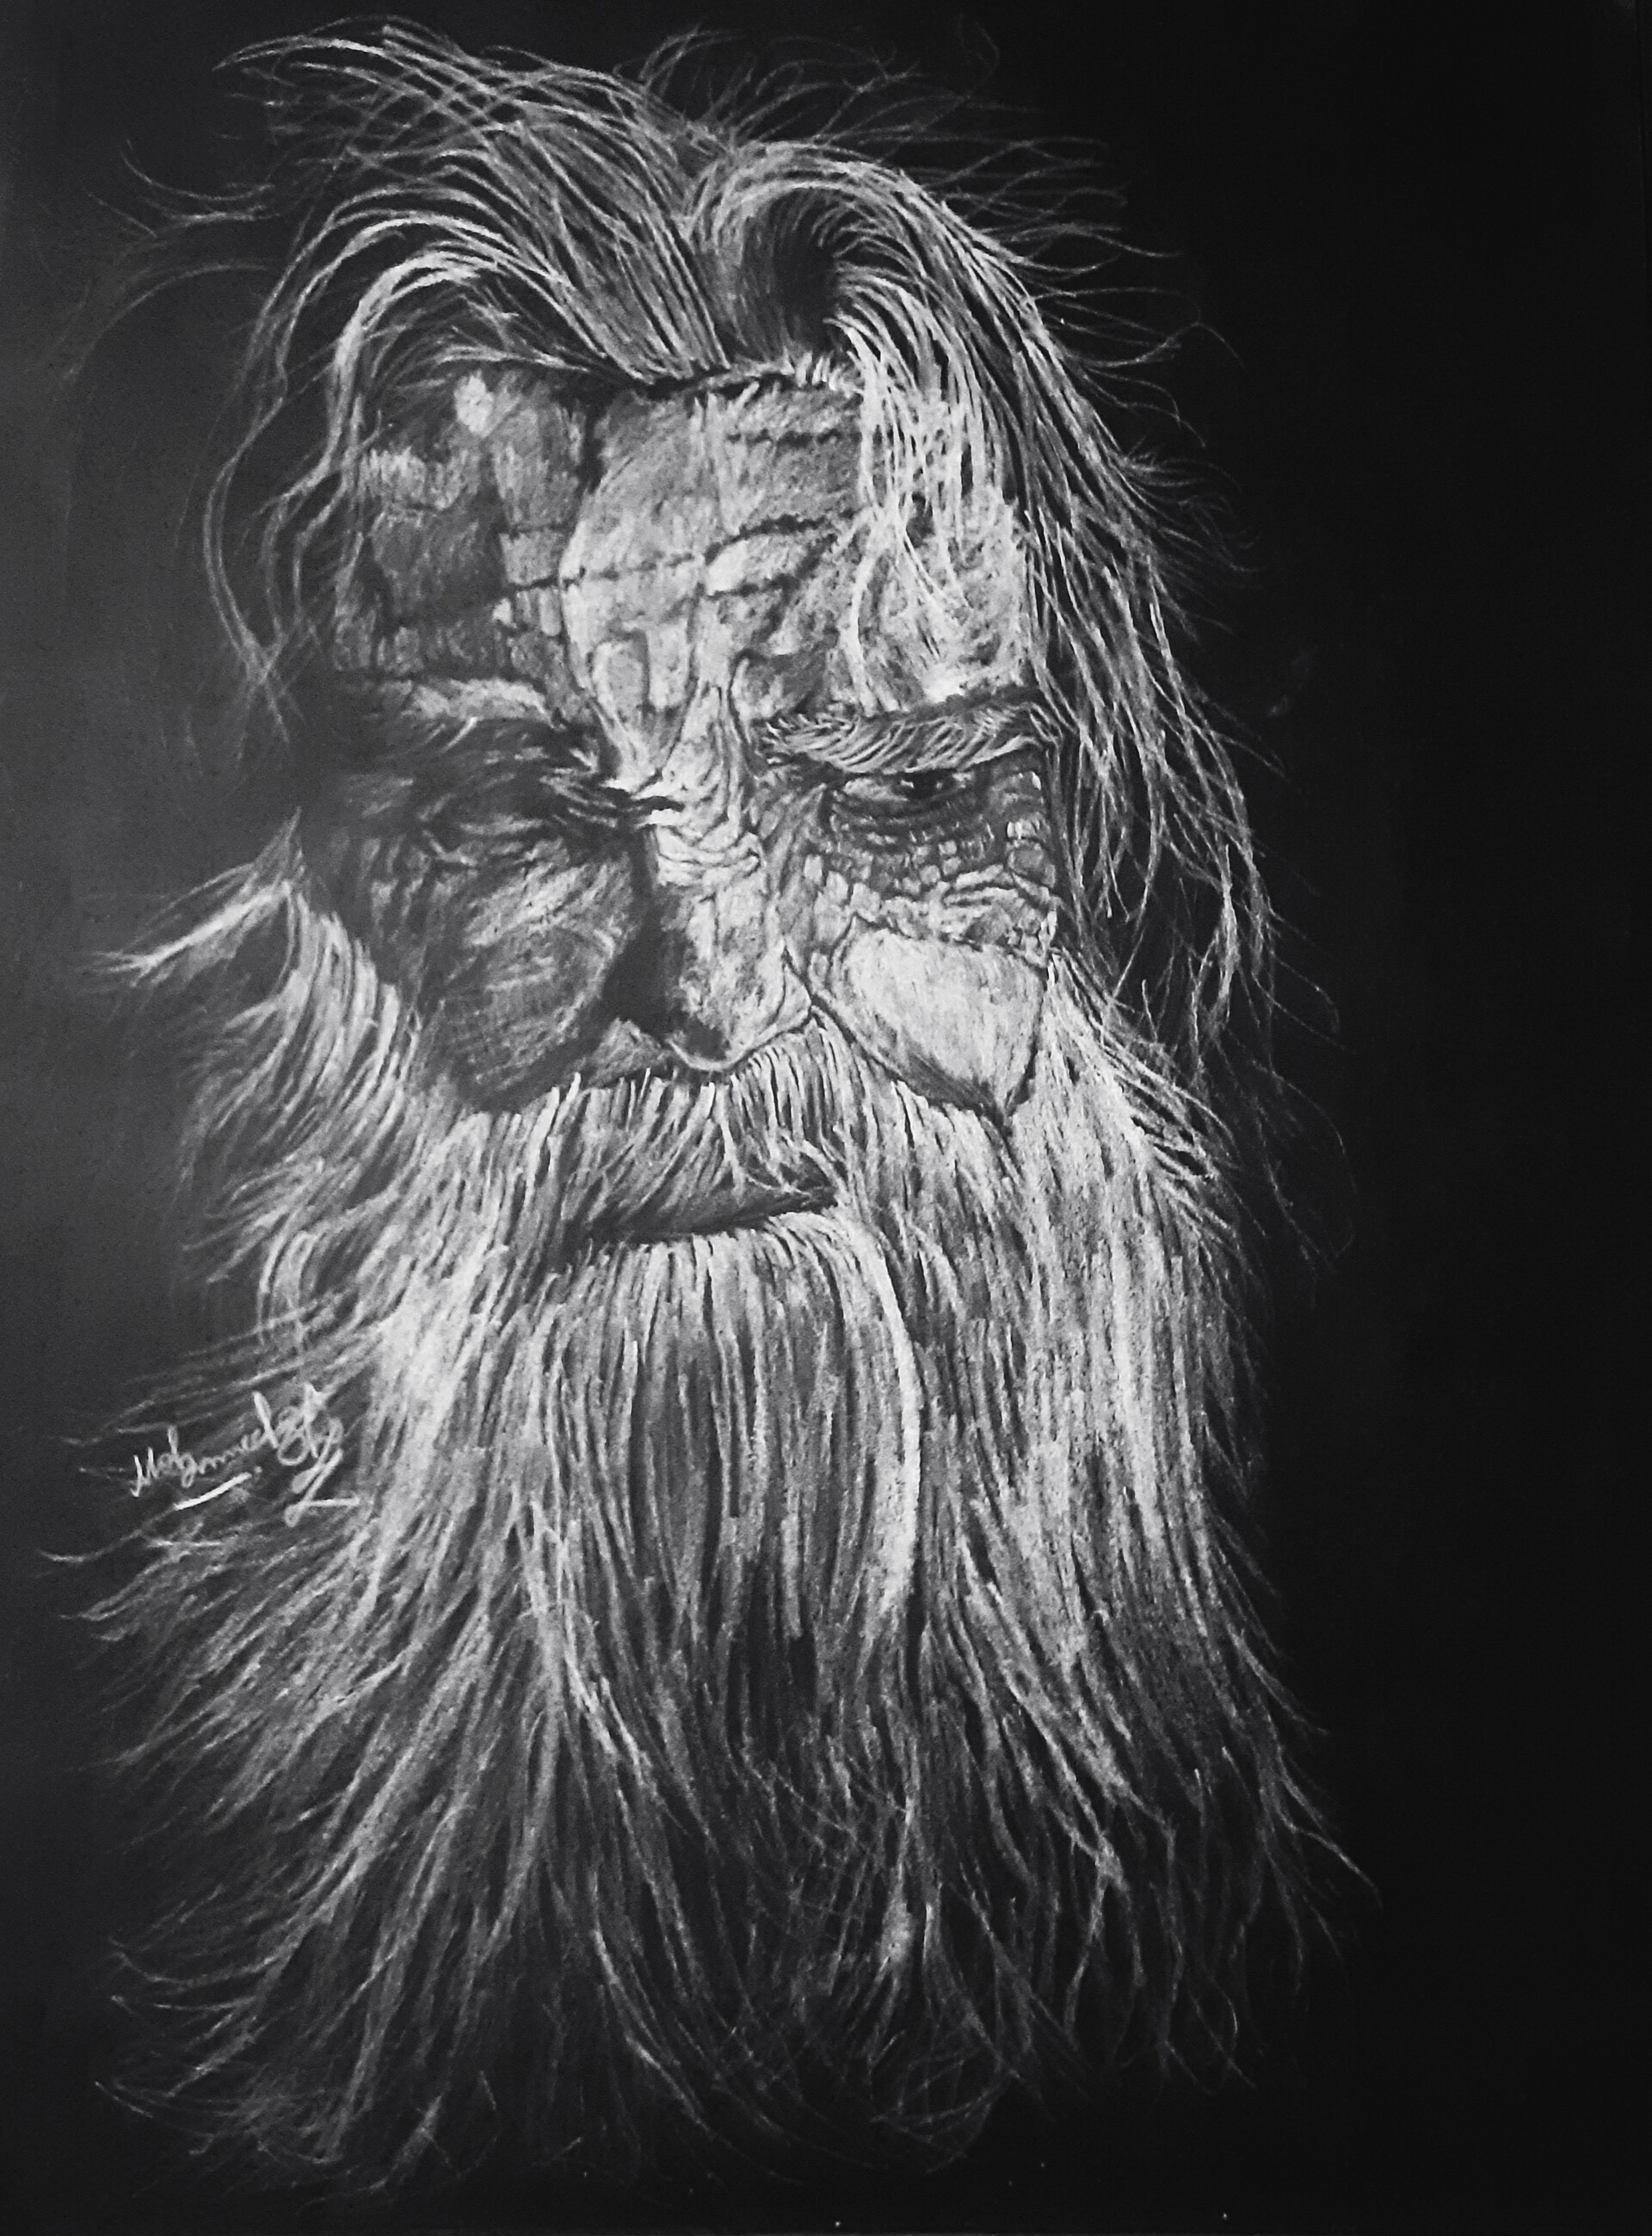 ArtStation - White Charcoal Drawing